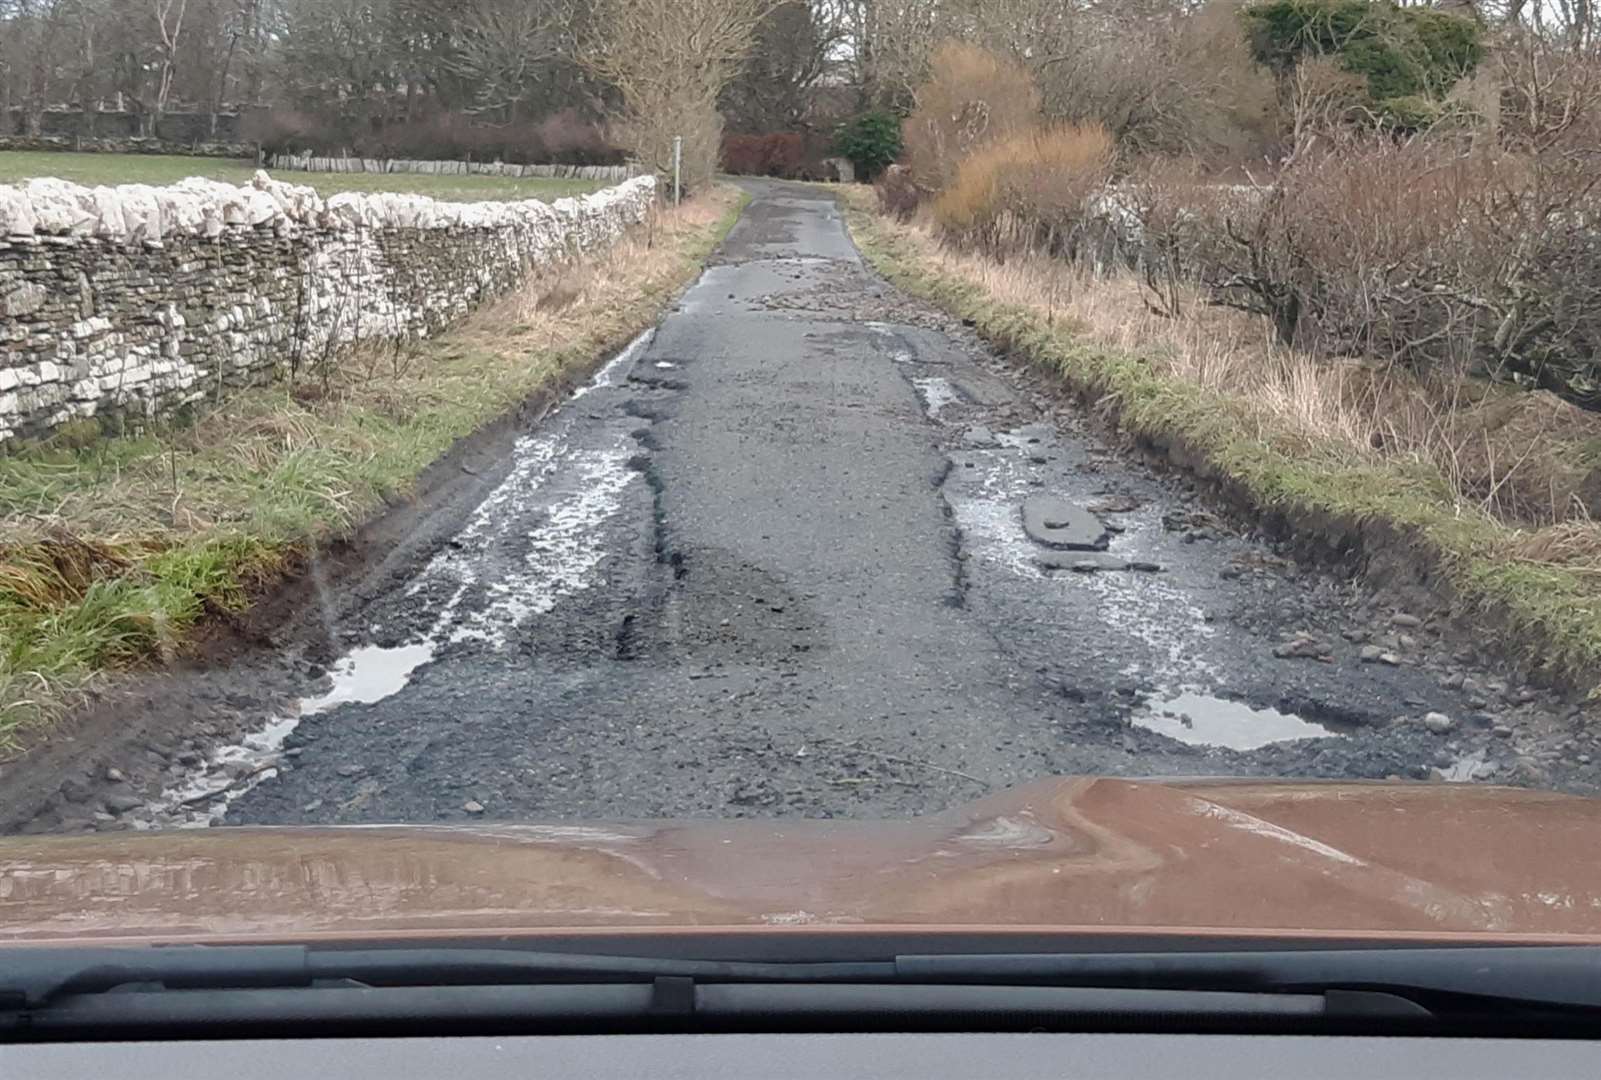 The two councillors say this road in the Castletown area ‘is so poor in parts it cannot safely be driven on in a conventional car’.